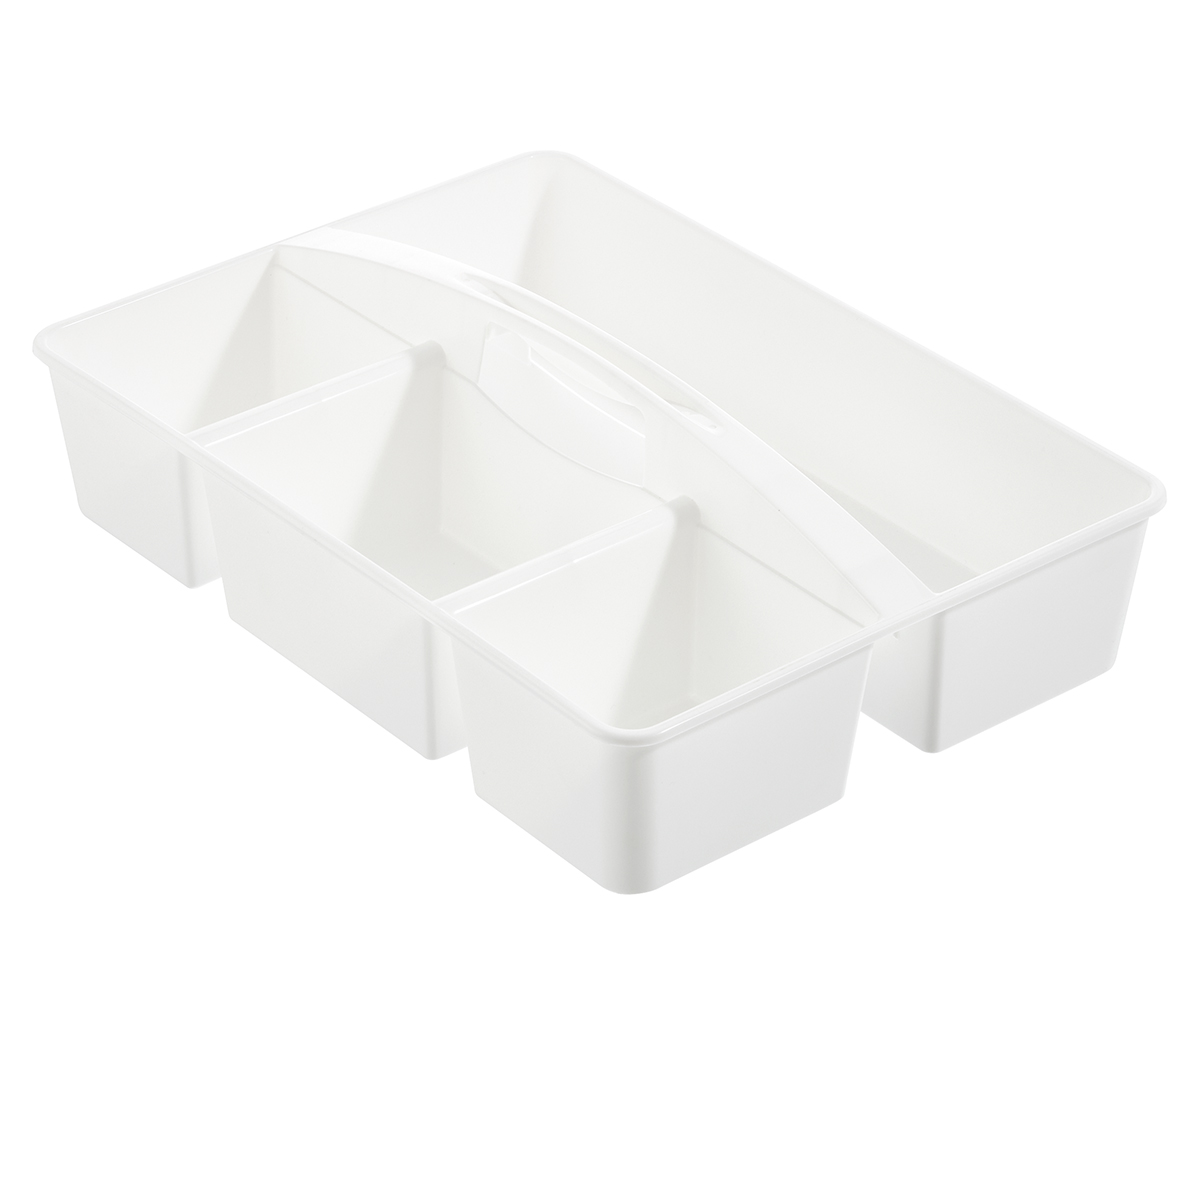 https://www.containerstore.com/catalogimages/427143/10084267_3-Tier_Cart_Divided_Caddy_W.jpg